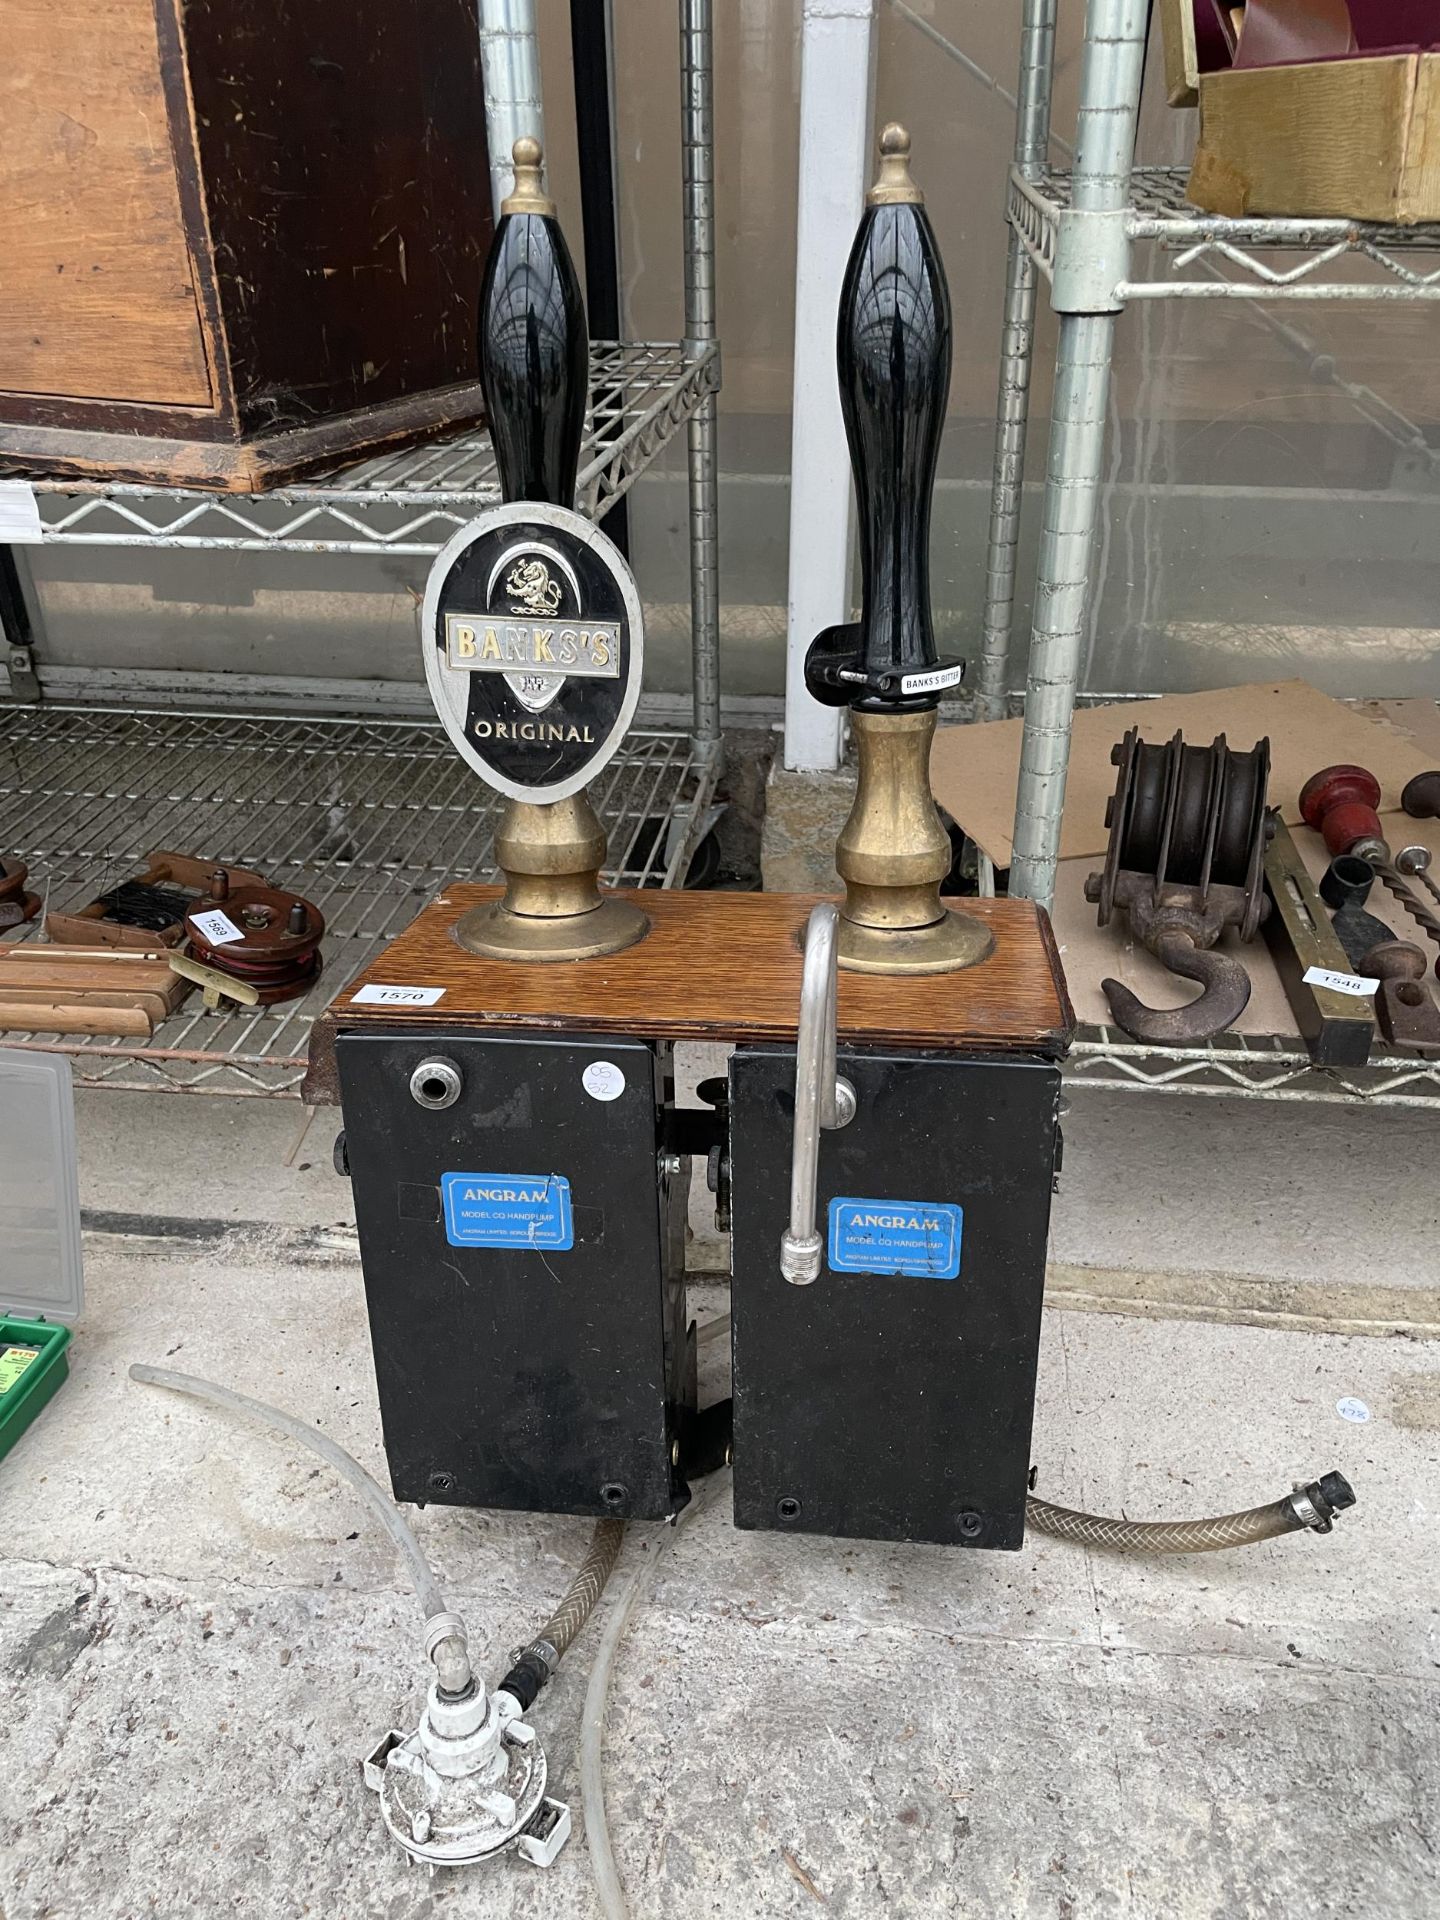 A VINTAGE REAL ALE BRASS AND WOODEN HAND BEER PUMP